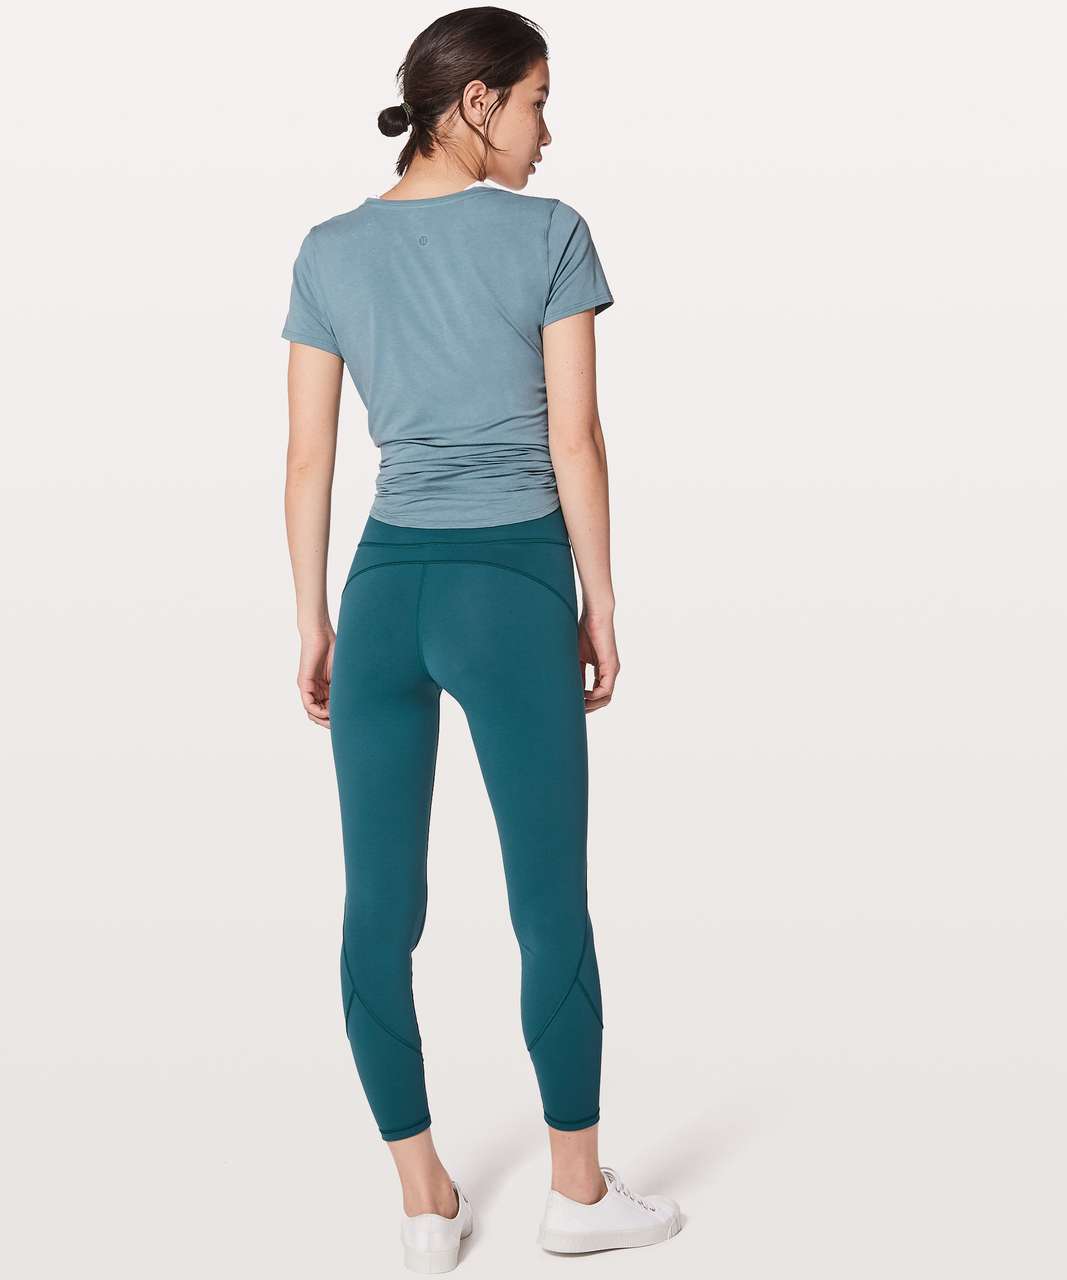 Lululemon In Movement Tight Size 8 Utility Blue 7/8